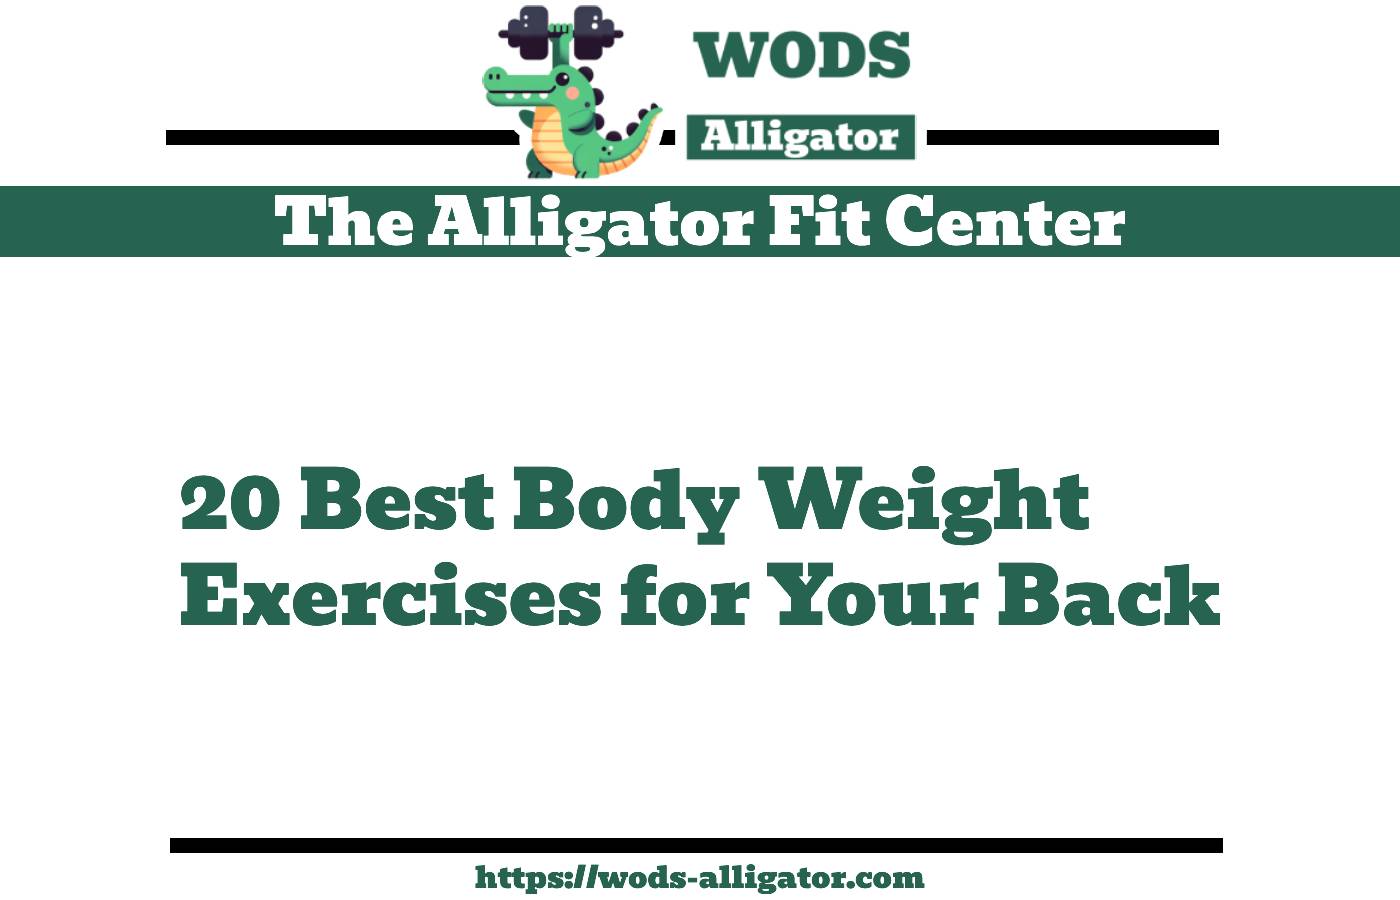 20 Best Body Weight Exercises for Your Back + 2 Workout Plans to Get You Moving